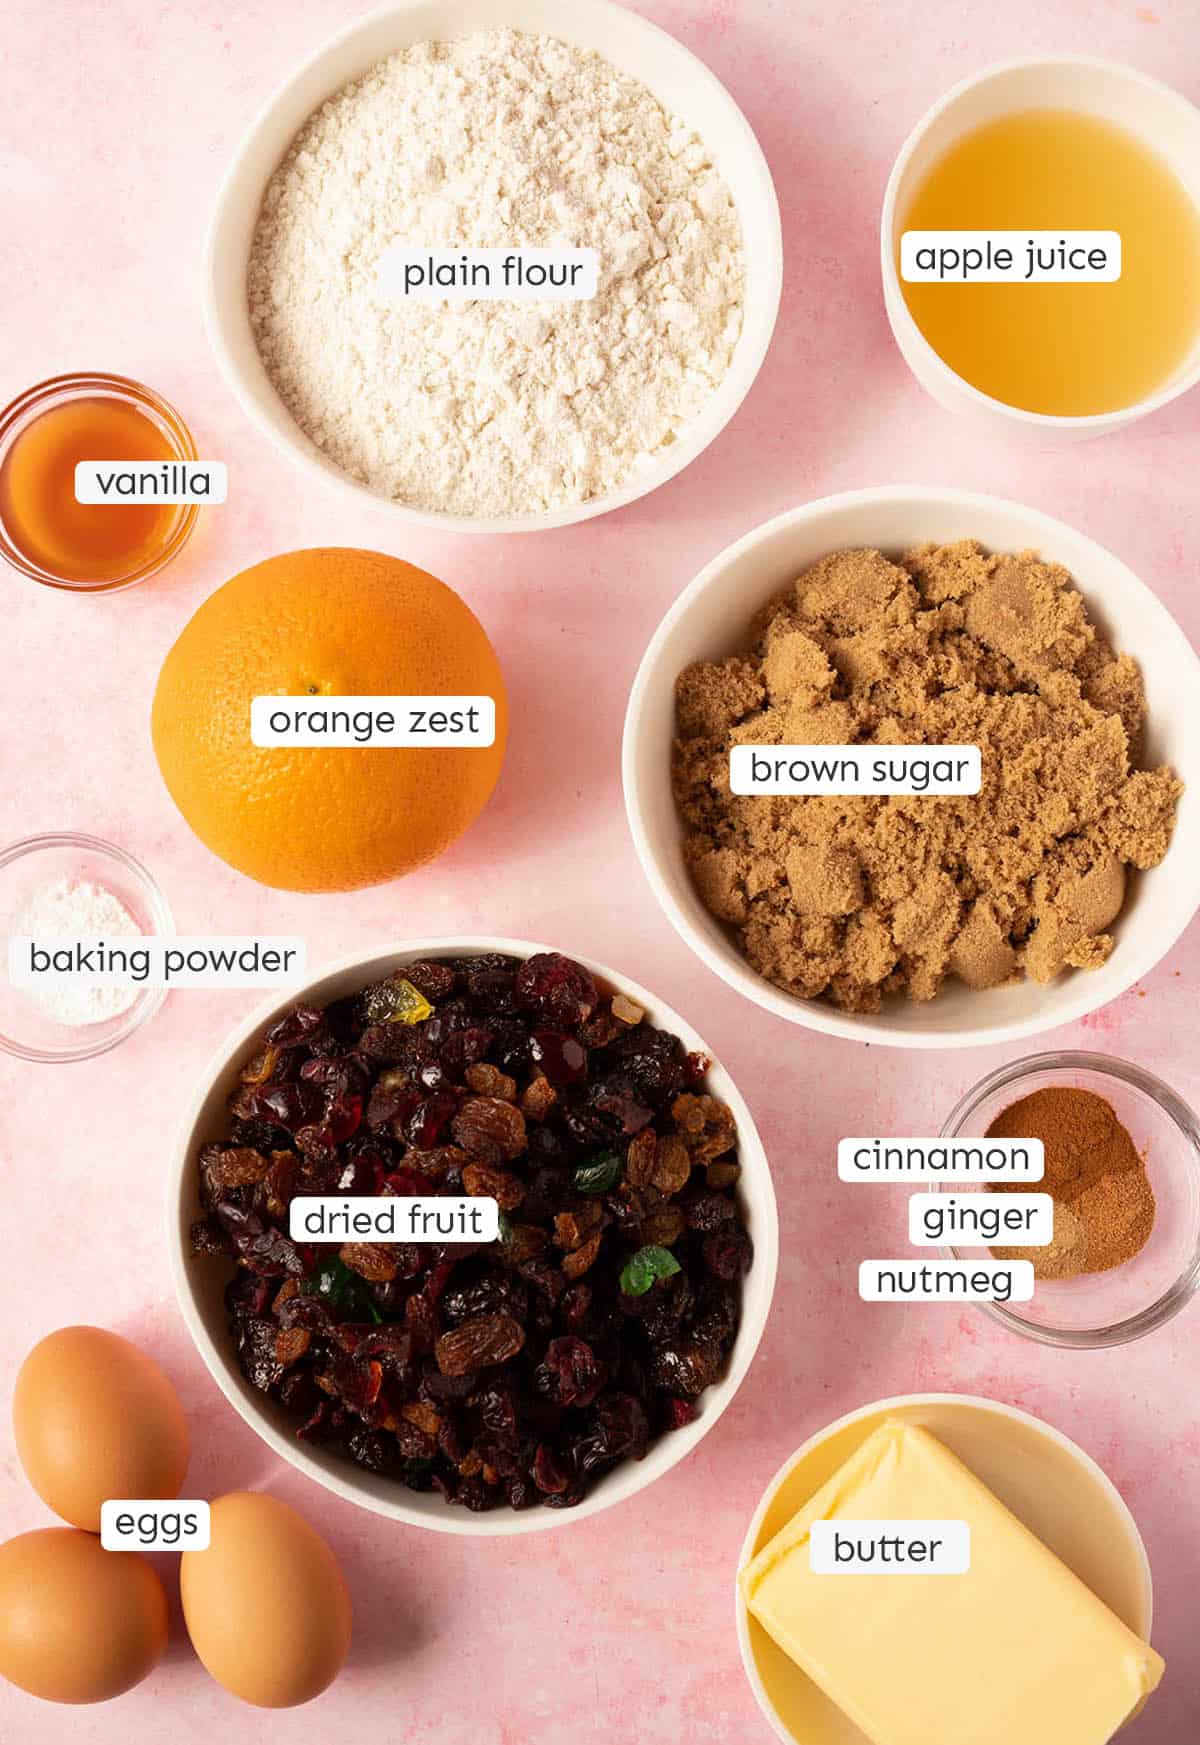 All the ingredients needed to make fruit cake from scratch laid out on a pink backdrop.